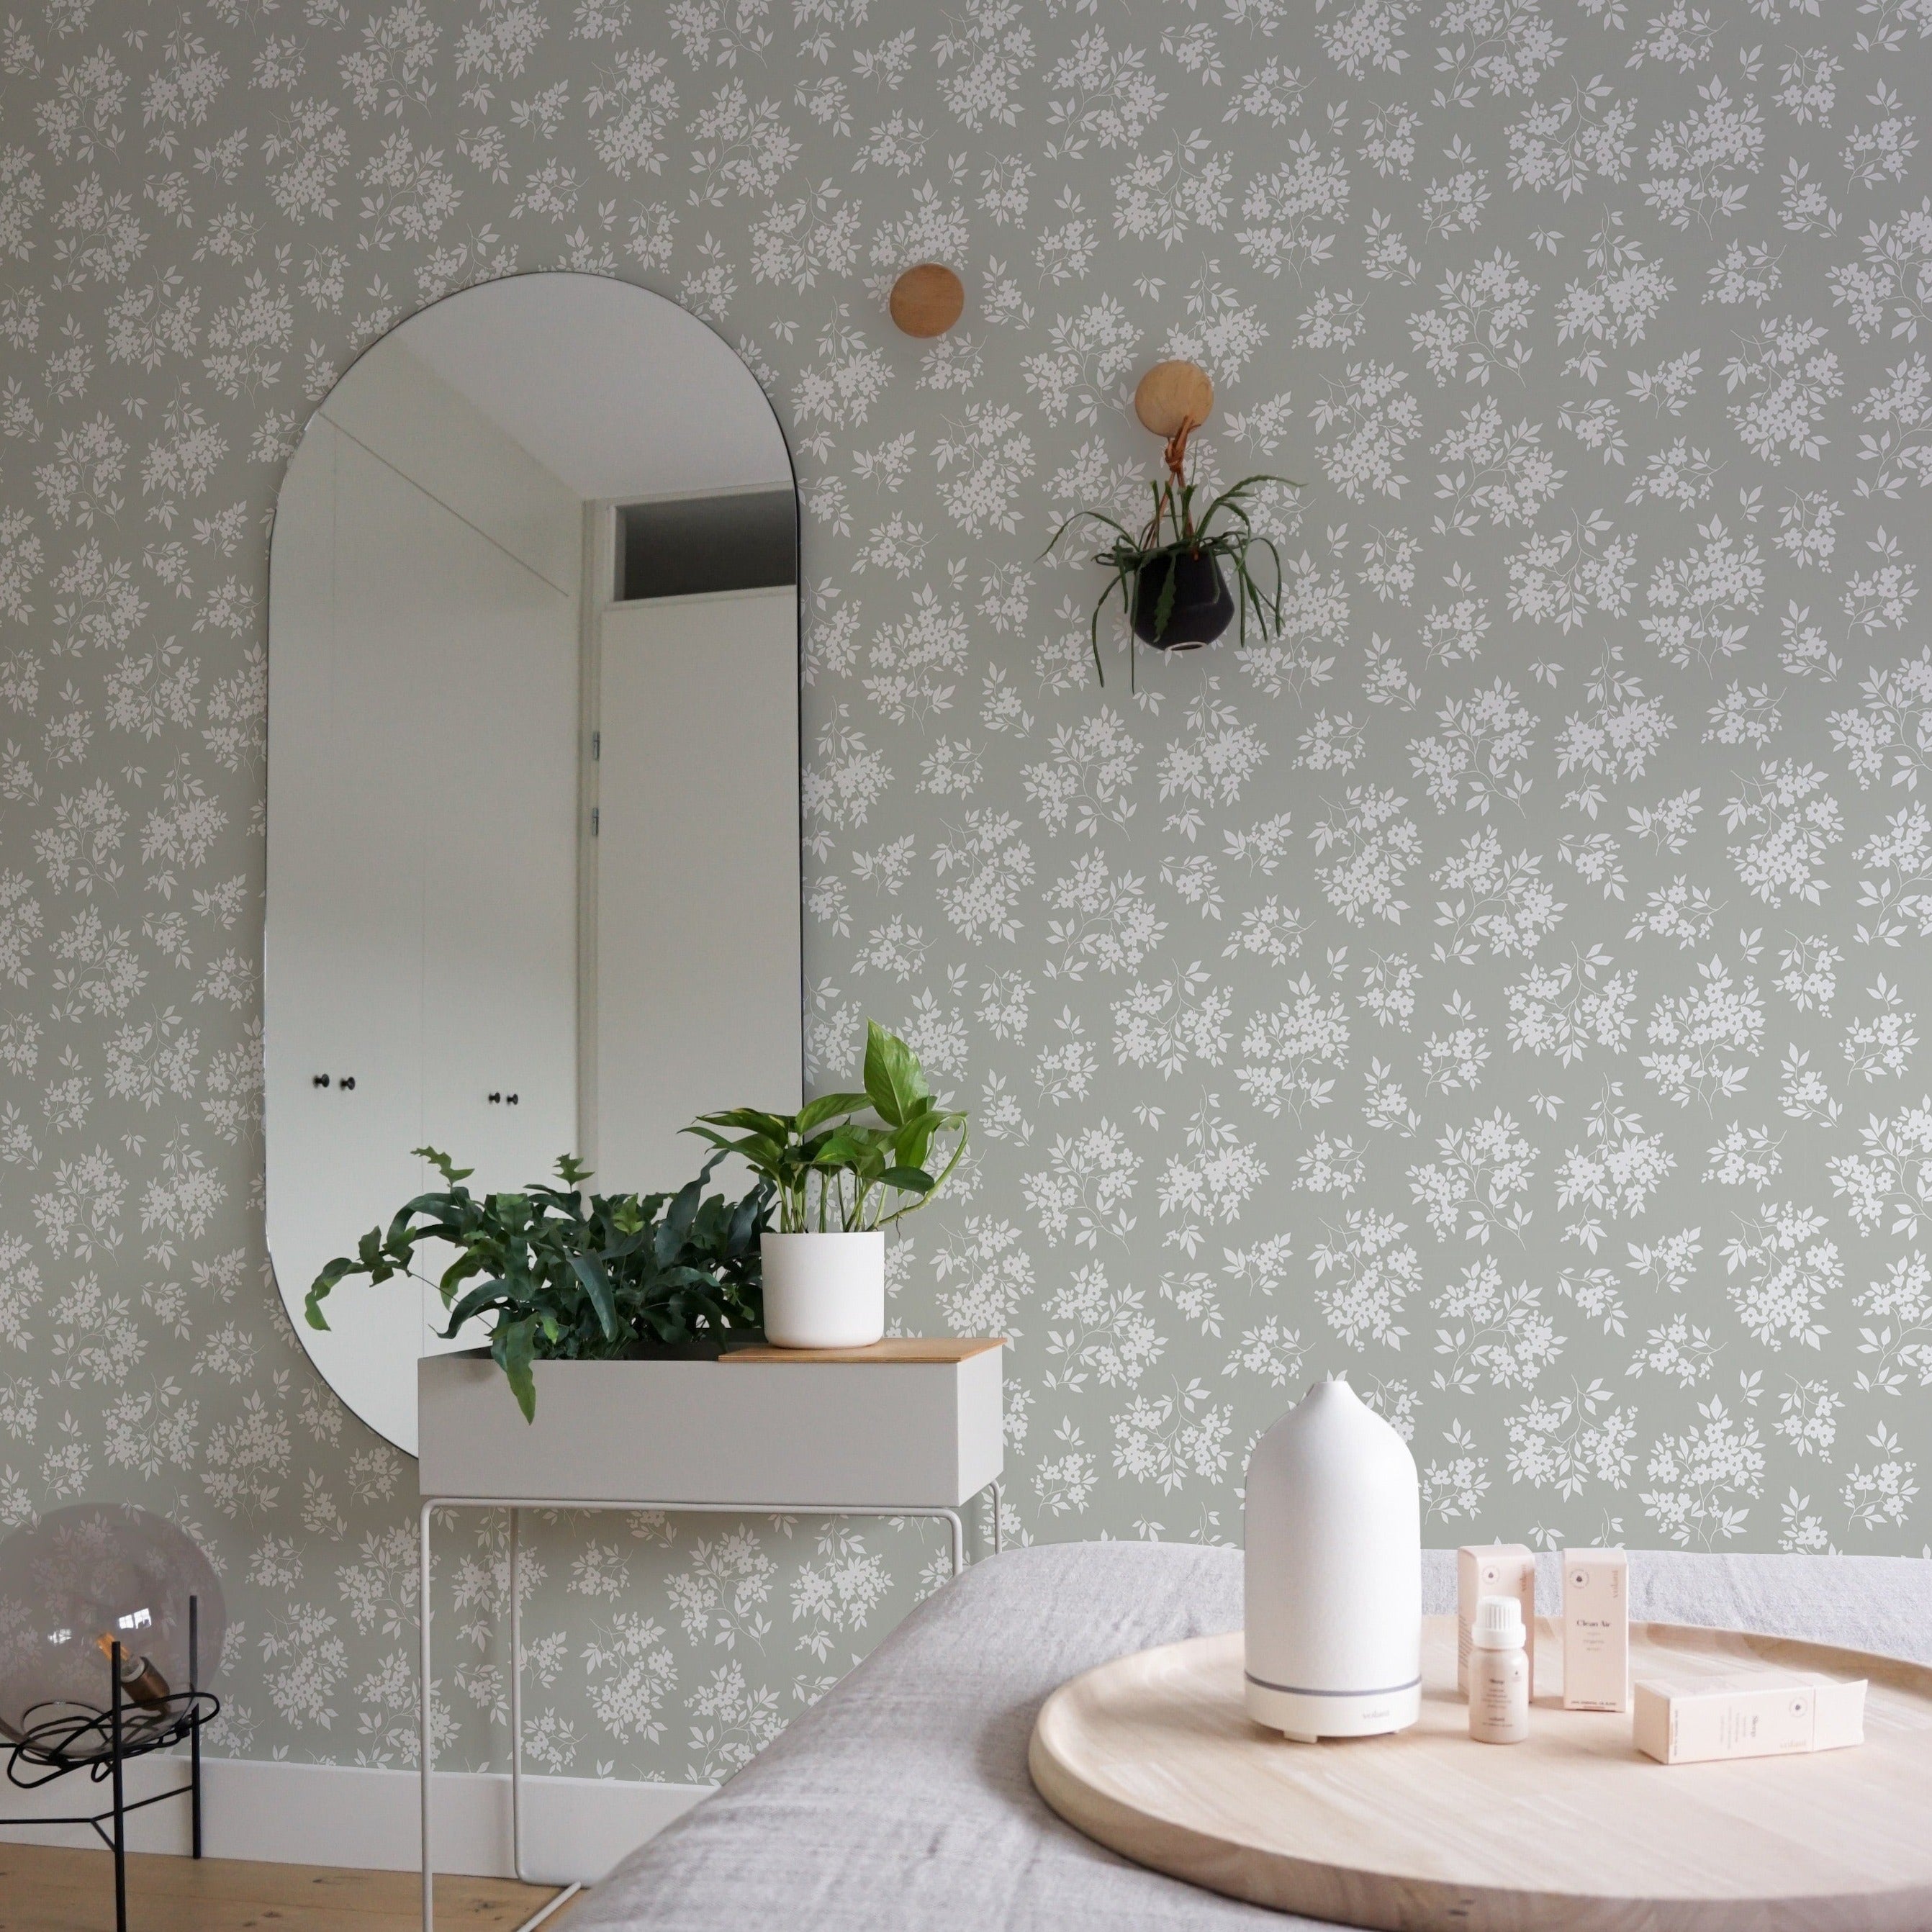 A tasteful interior featuring the Vintage Garden Floral Wallpaper in Olive as a backdrop. A sleek, oval-shaped mirror is centered on the wall, with a floating shelf below holding a lush potted plant and a white diffuser. To the right, hanging planters add vertical interest, completing the room's fresh and organic aesthetic.